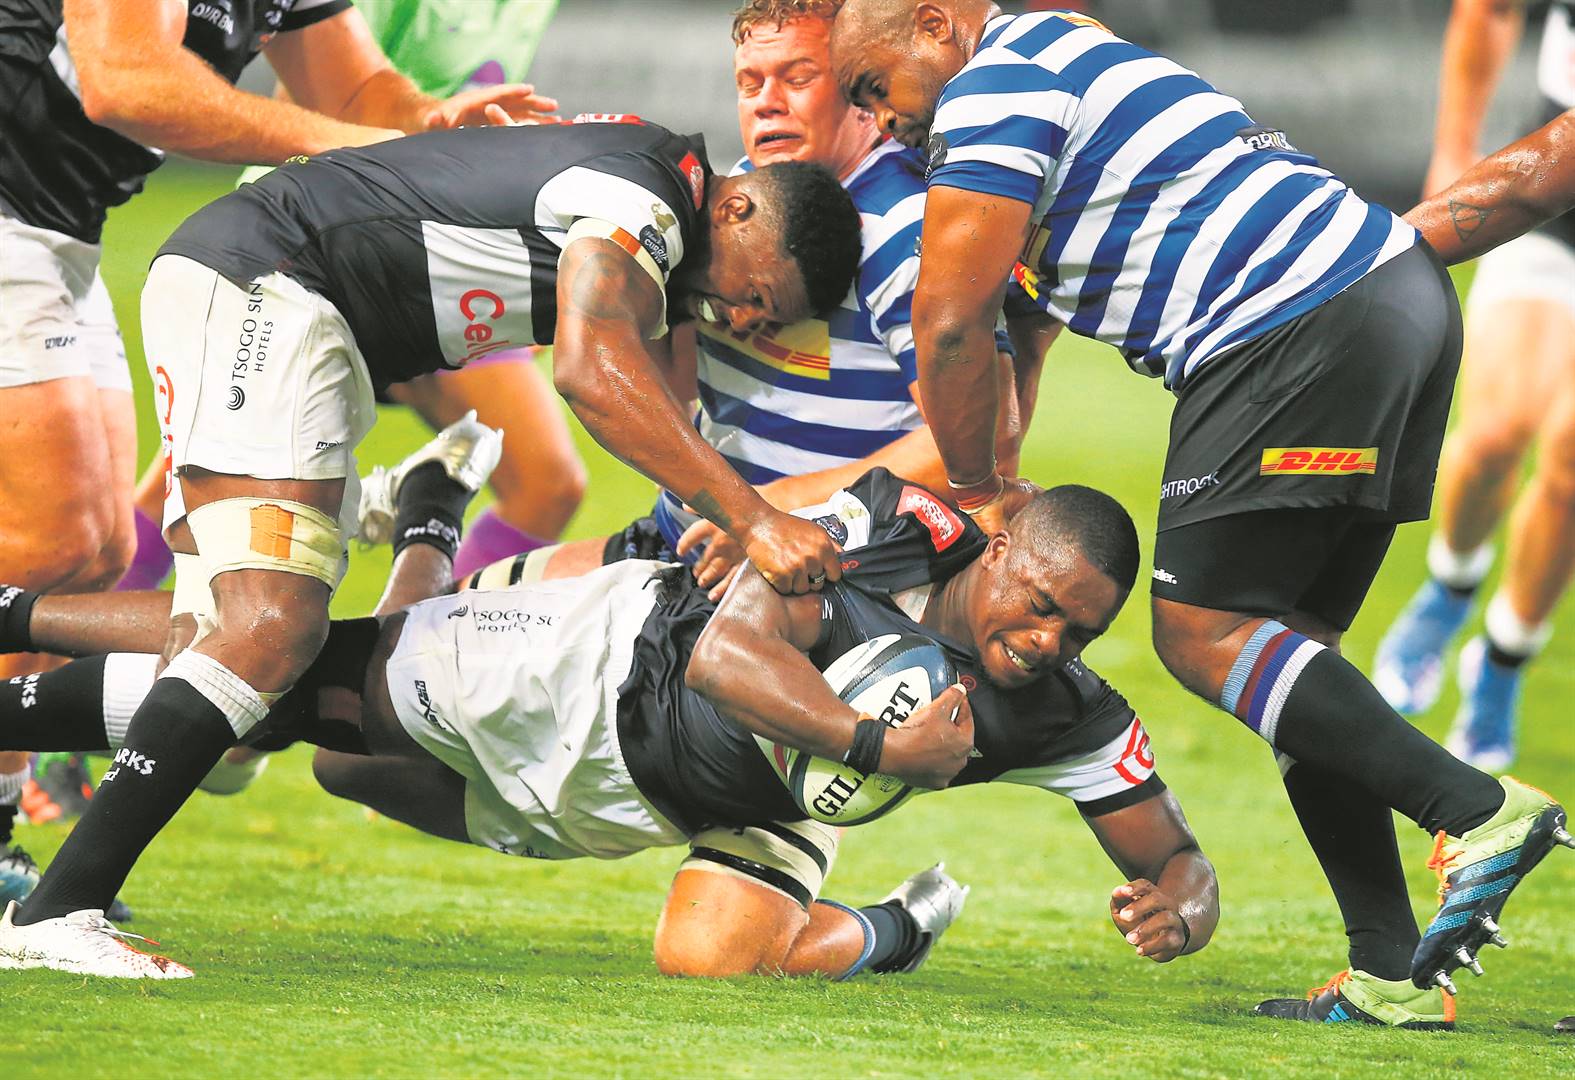 One of three changes in the front row, Sharks hooker Fez Mbatha will hope to cross the advantage line against the Cheetahs as often as he did against the Western Province at Hollywoodbets Kings Park in February. PHOTO: Gallo